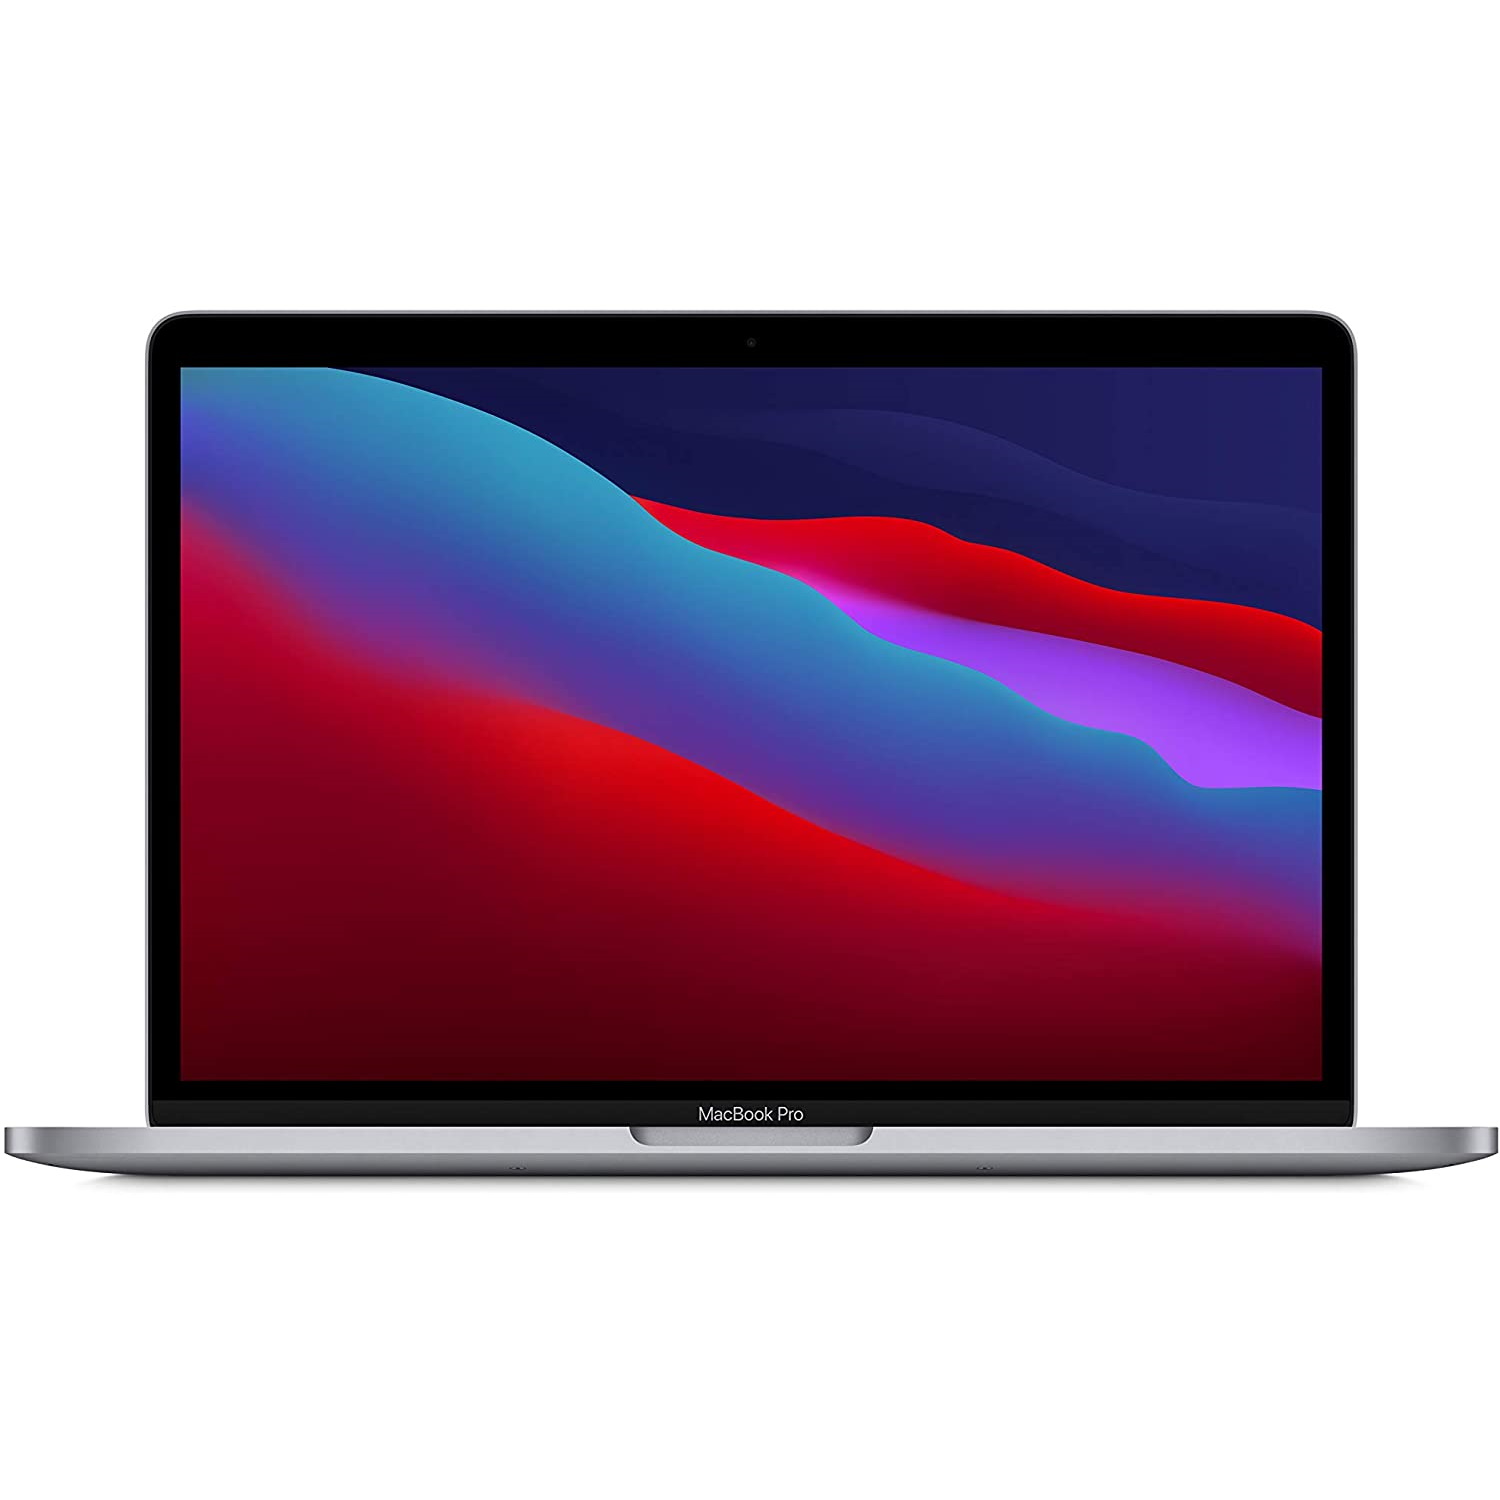 MacBook Pros could come with macOS 12 already installed with an M1X chip.